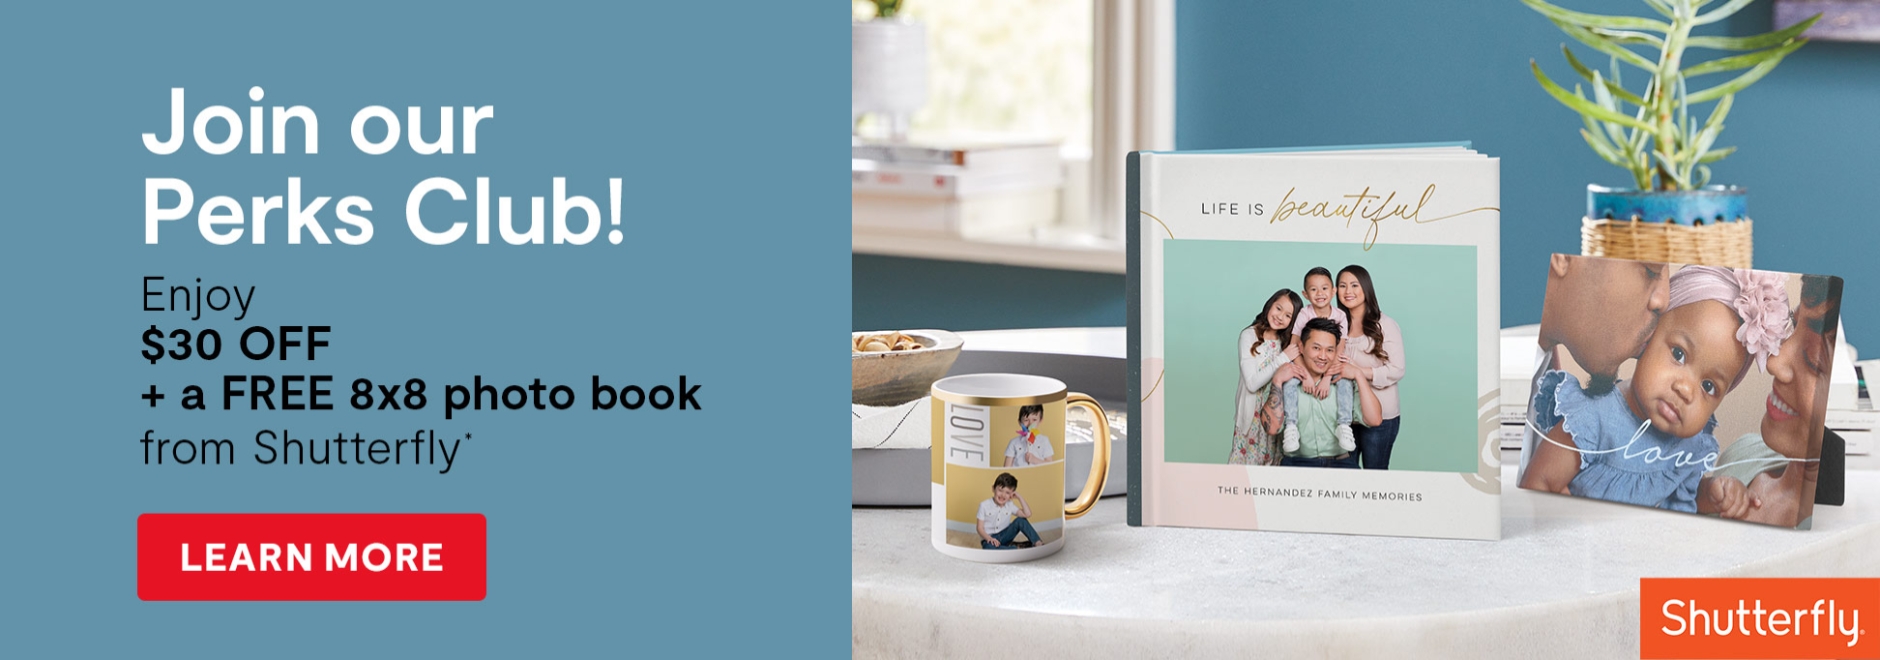 Join our perks club and enjoy $30 off plus a free 8x8 photo book from Shutterfly!